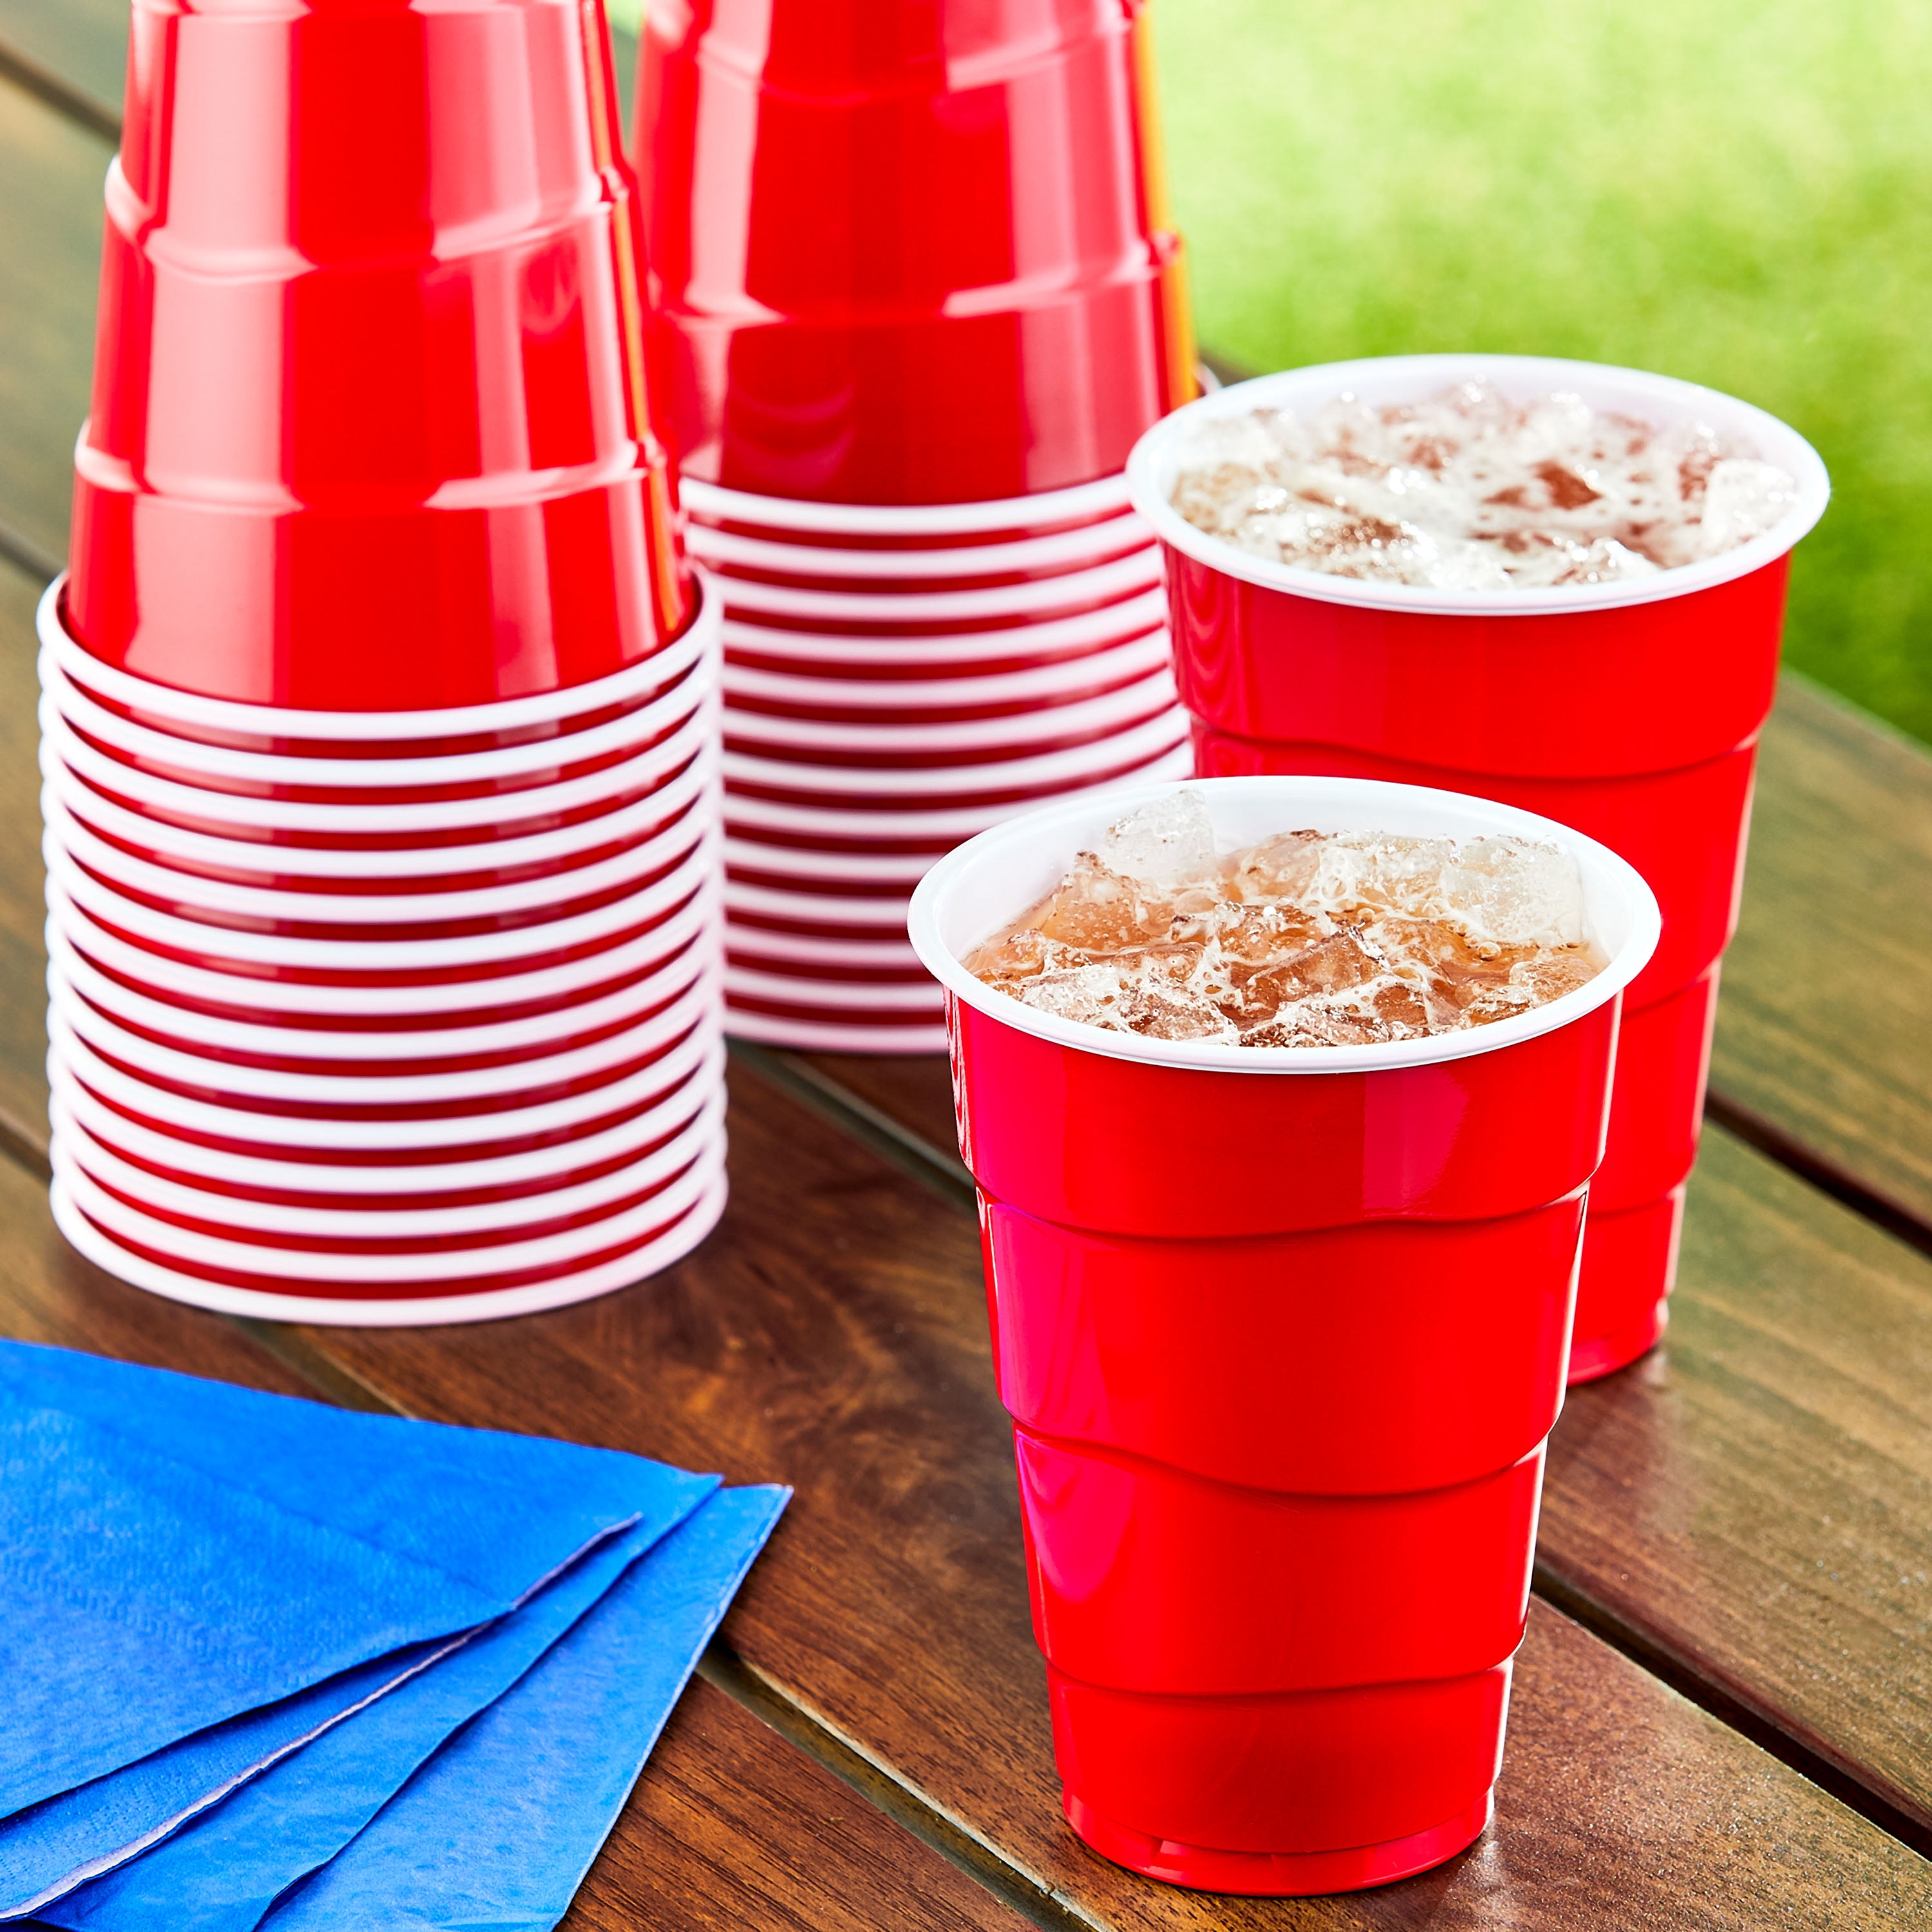 Our favorite ubiquitous red plastic cup gets a seriously stylish